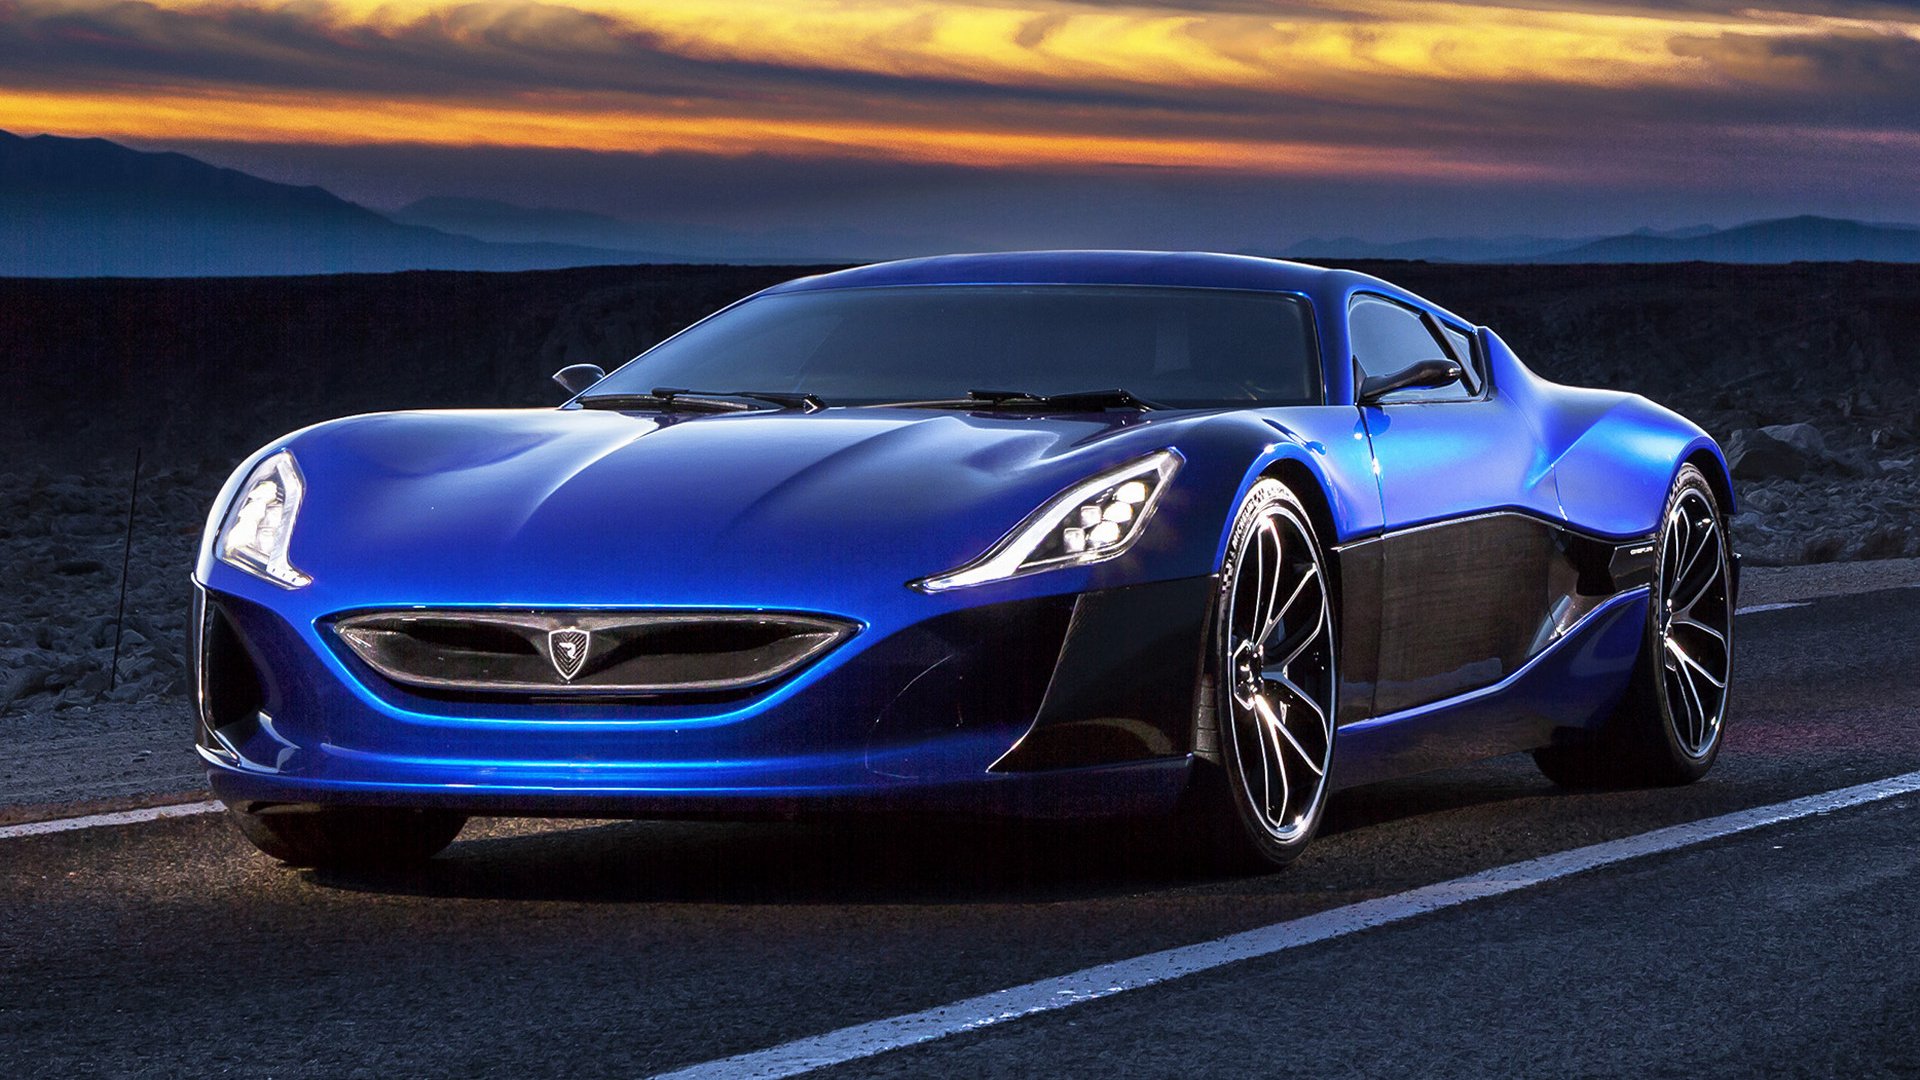 2014 Rimac Concept_One HD Wallpaper | Background Image ...